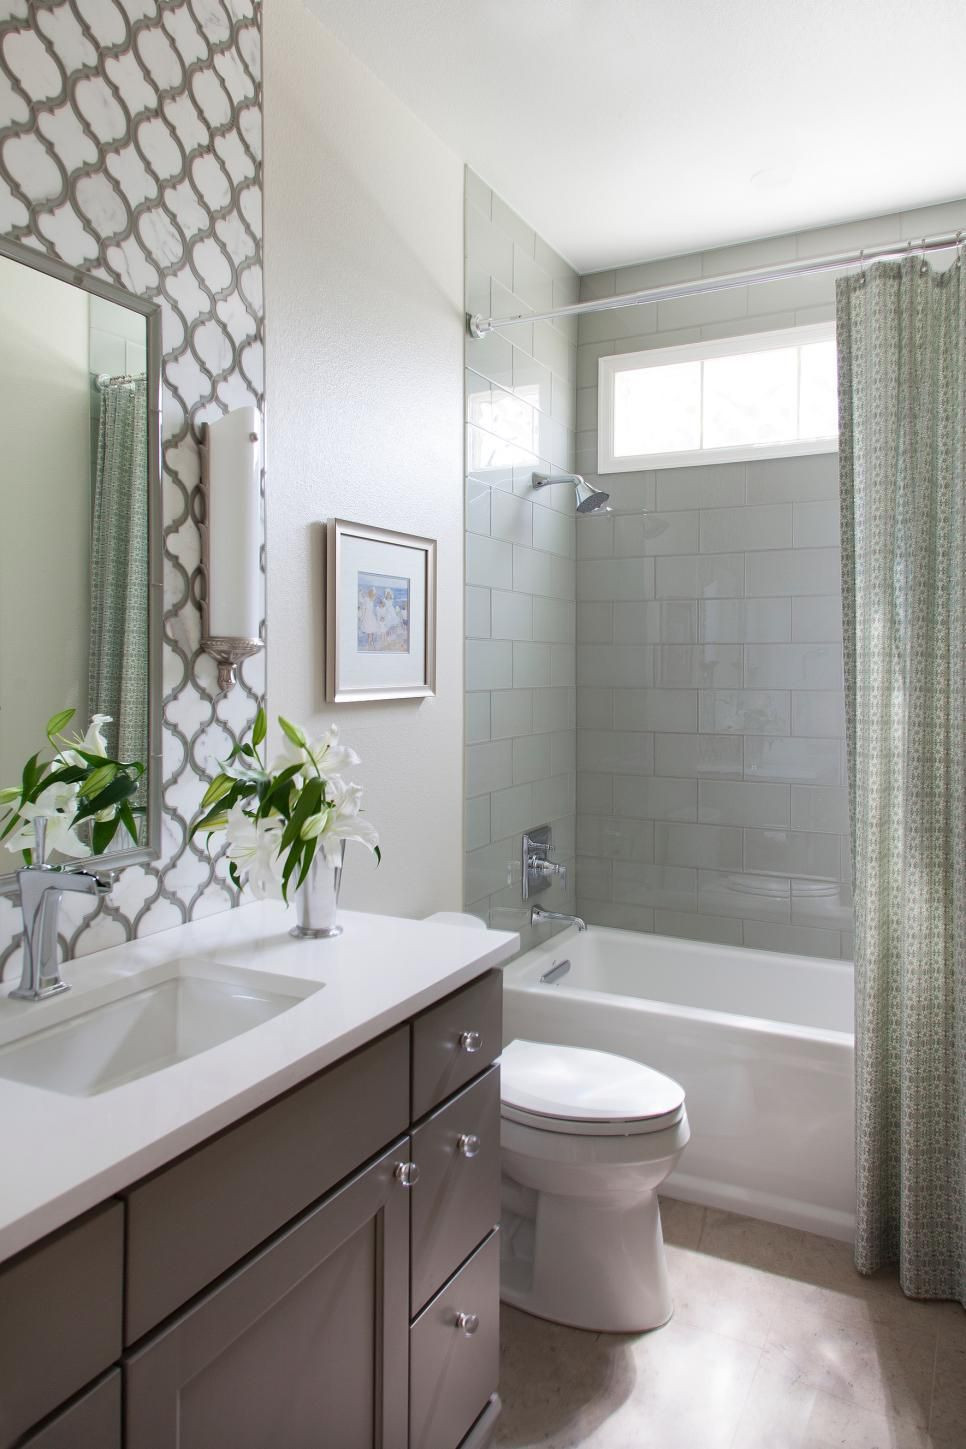 Guest Bathroom Remodeling
 This small guest bathroom packs in a lot of style with a